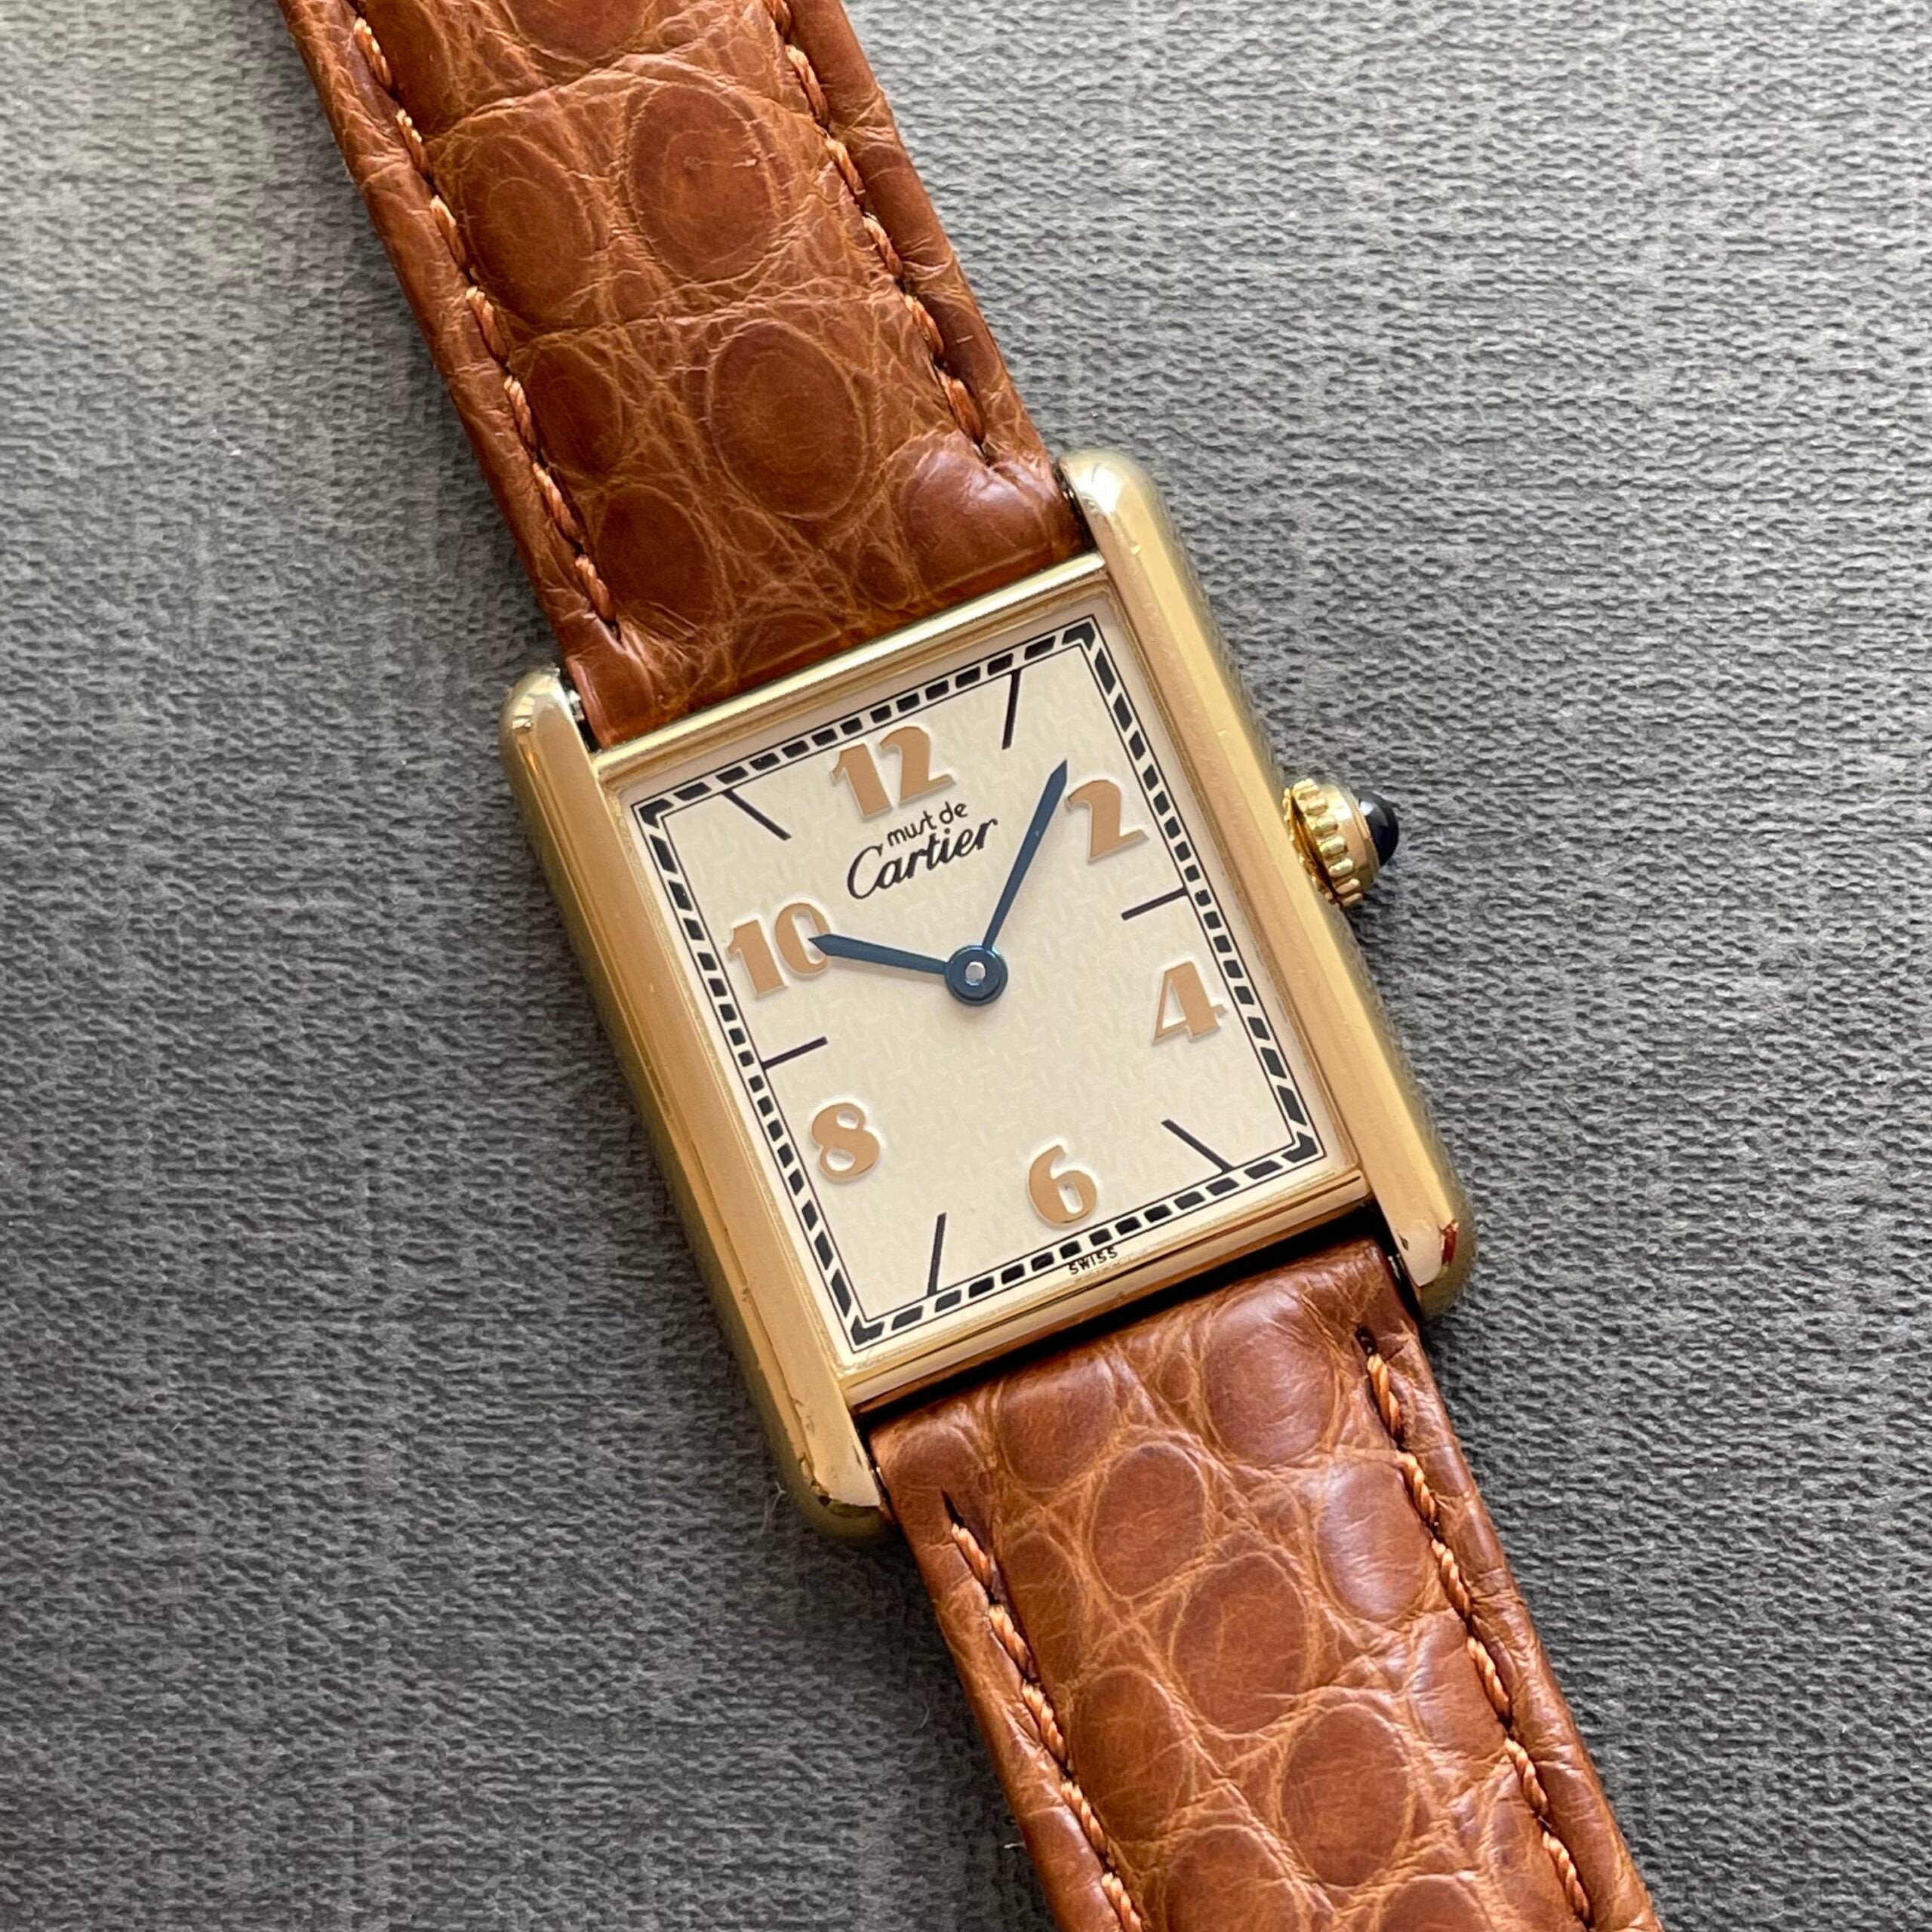 [Cartier] Mast tank LM flying Arabia accessories